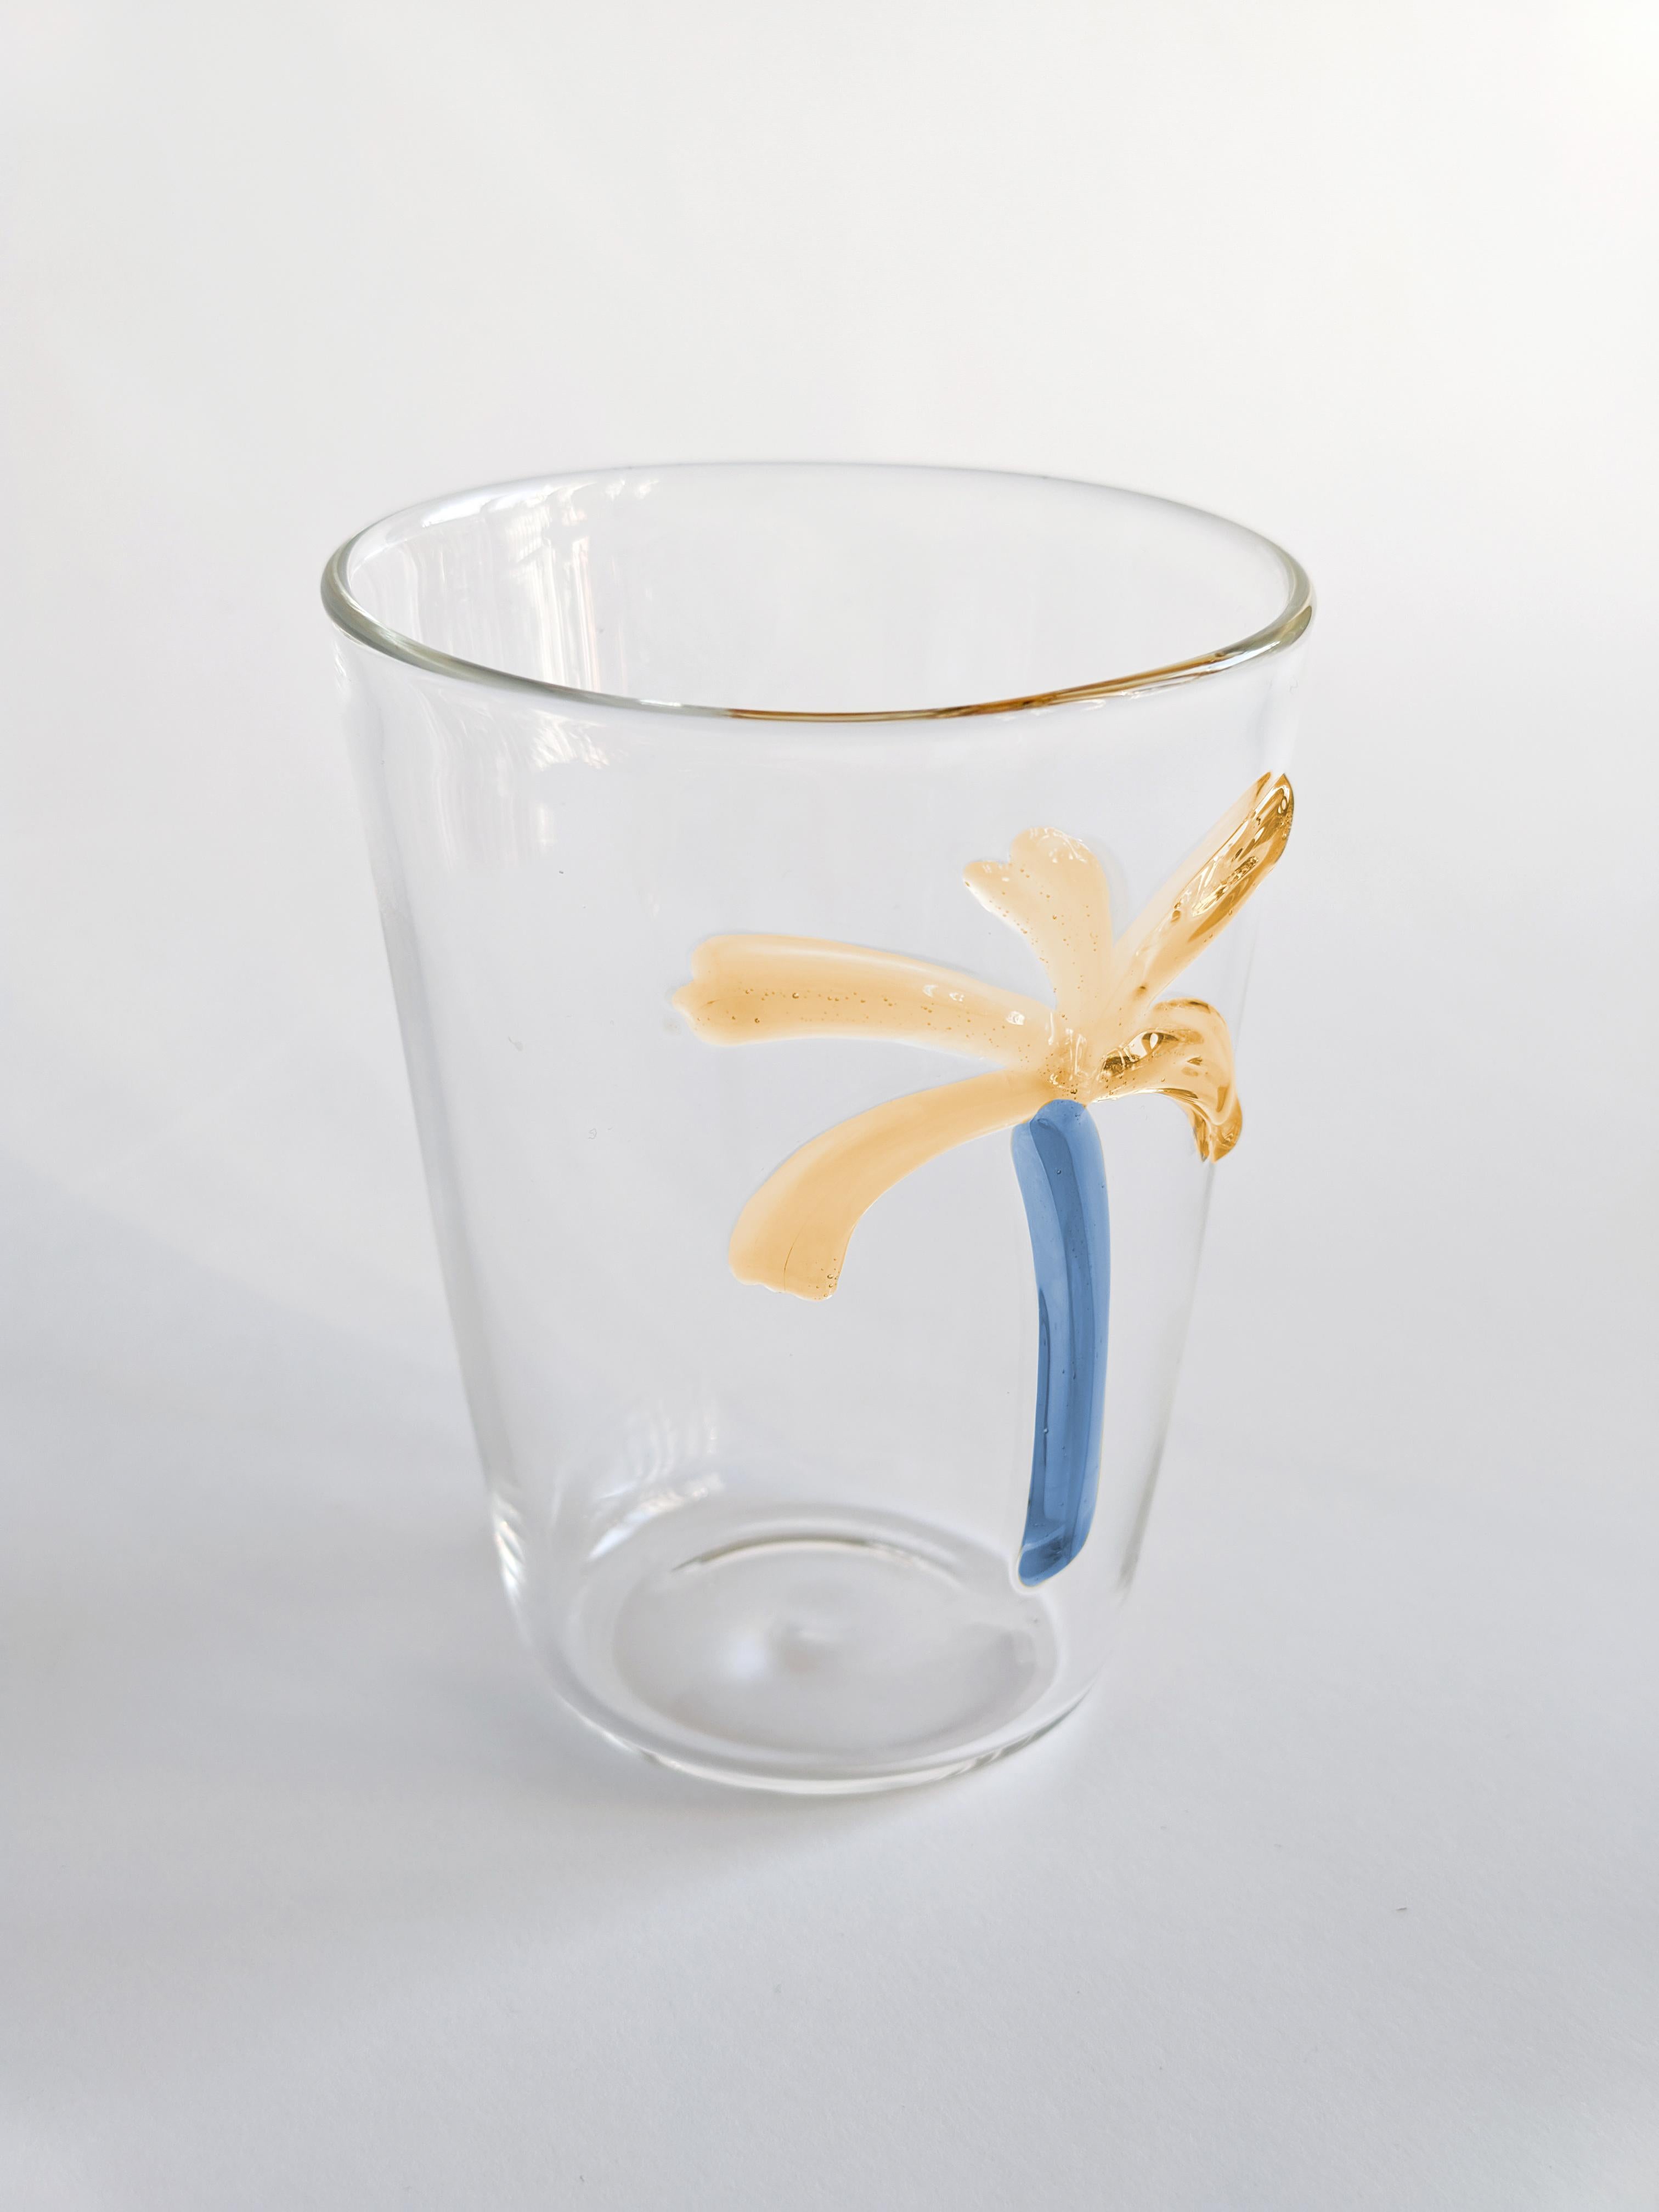 Las Palmas glasses are a collection of made in Italy blown glasses and a pitcher. Every piece is unique and embellished with palm inspired decoration.
Set of two water glasses.